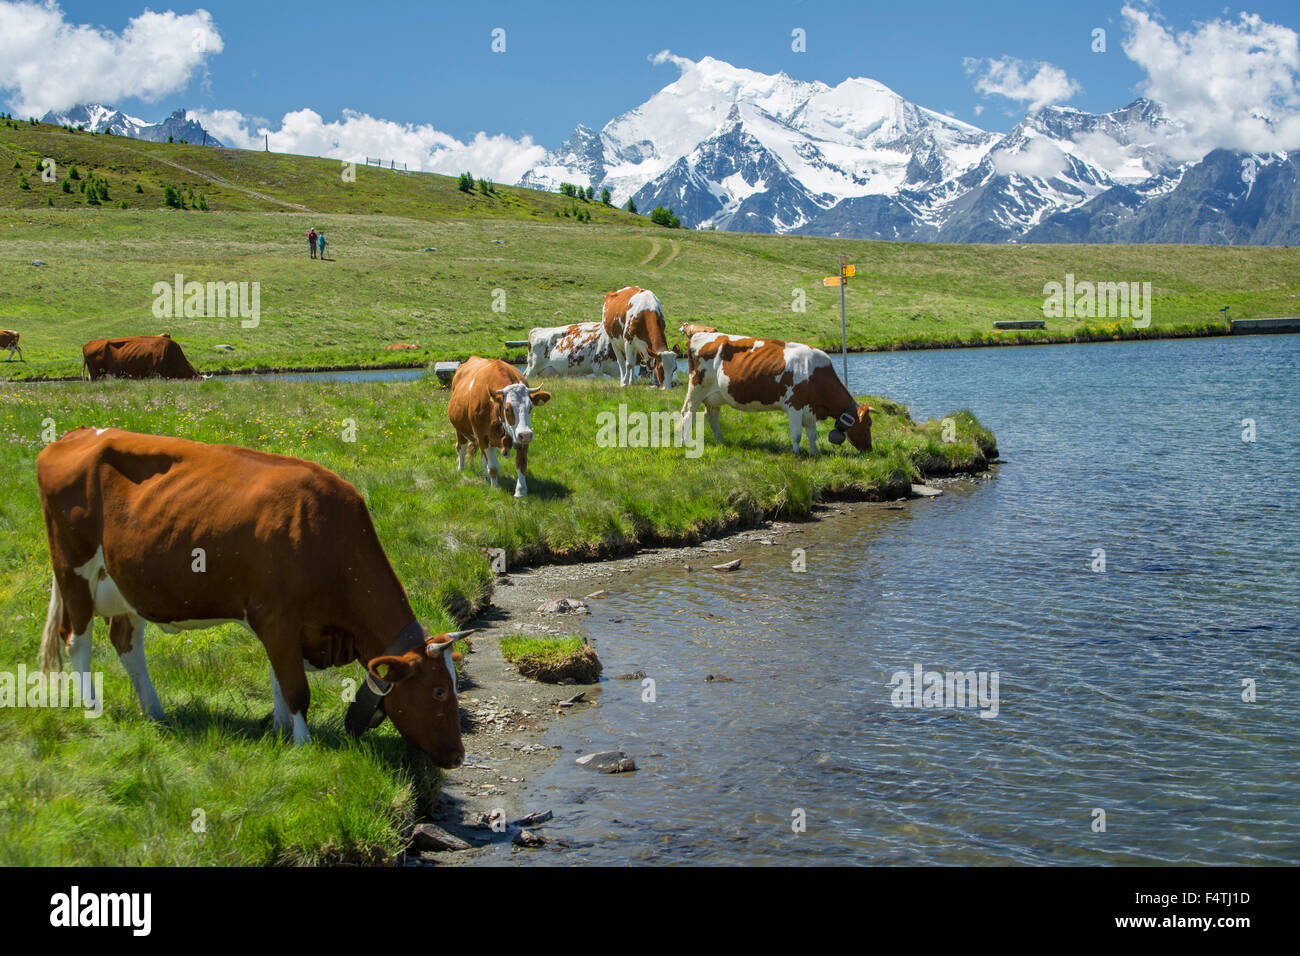 Le mucche in Gibidumsee, sfondo: Weisshorn, Foto Stock